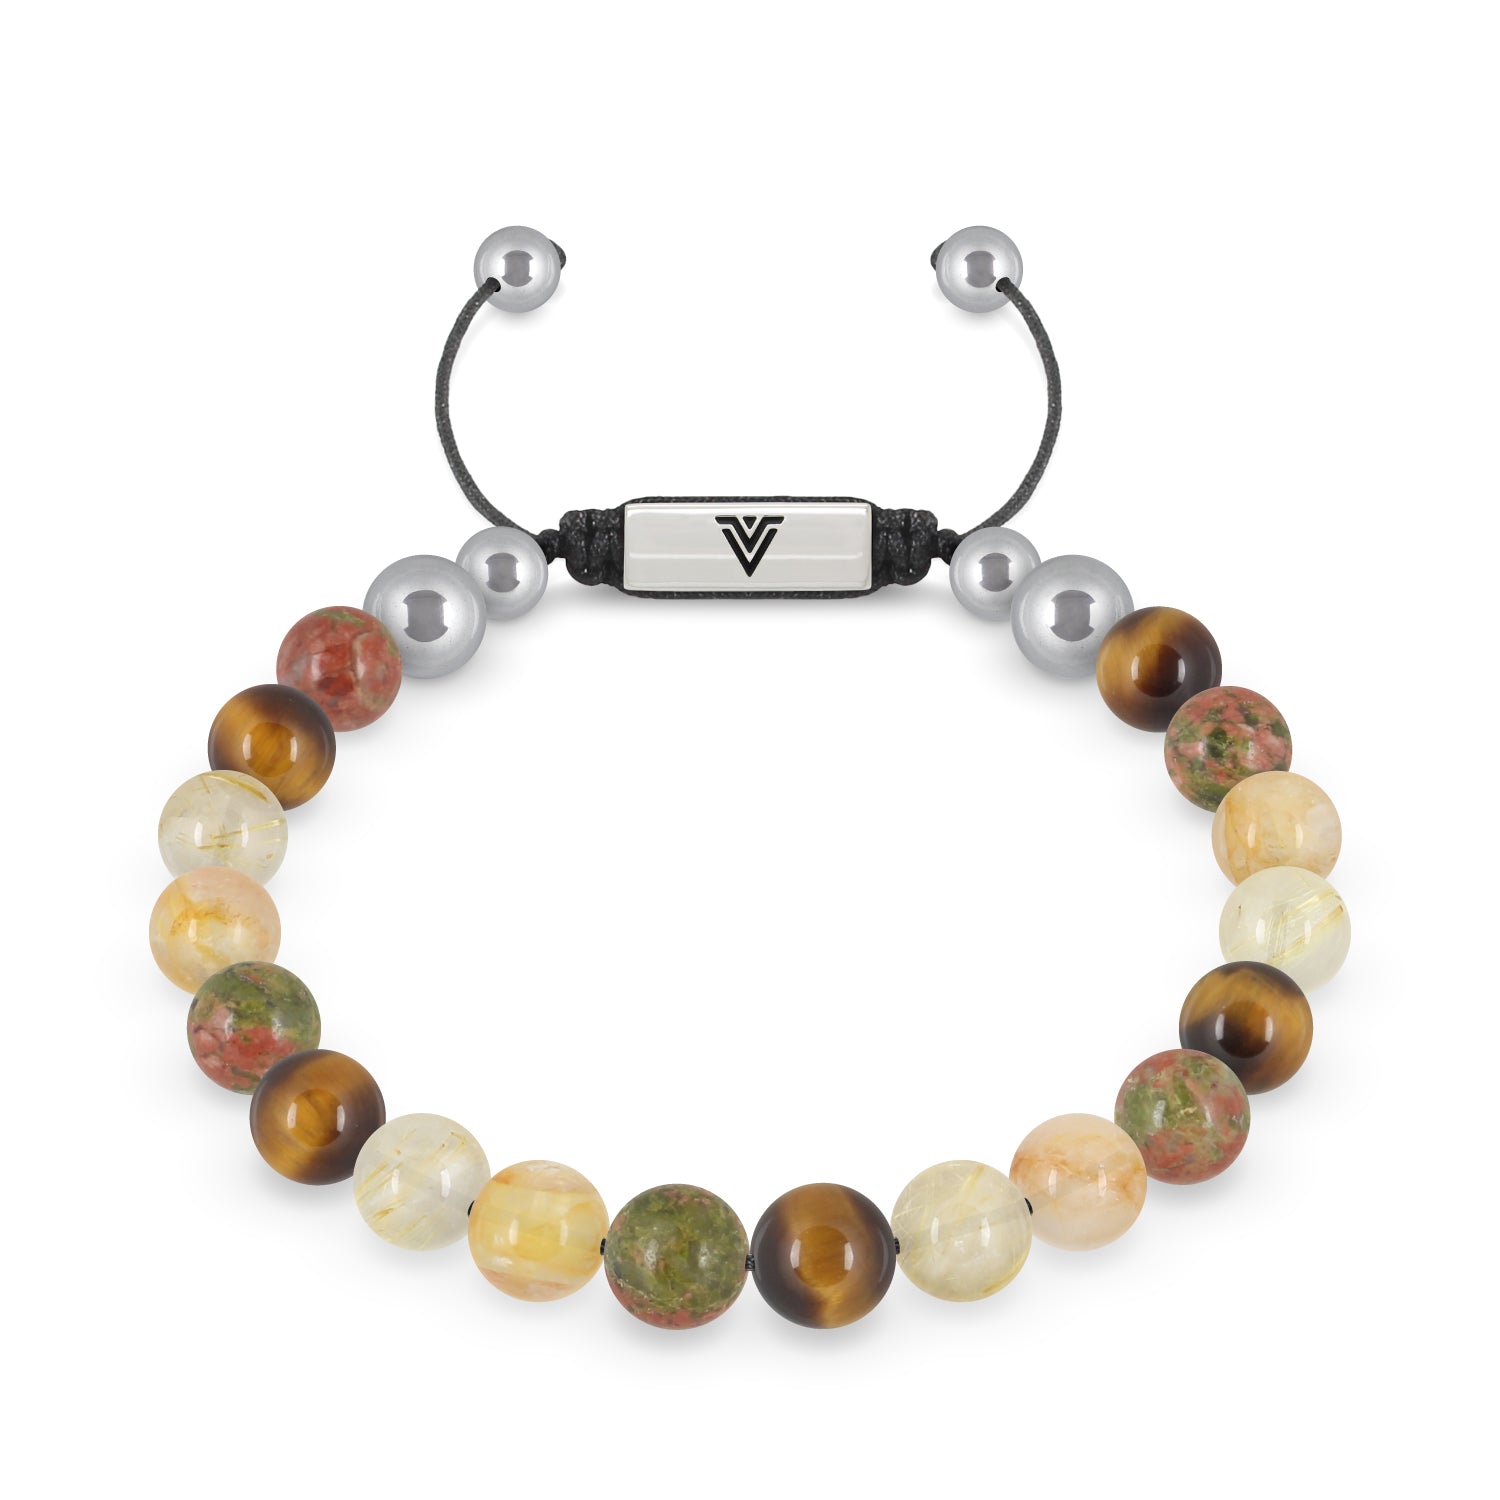 Front view of an 8mm Solar Plexus Chakra beaded shamballa bracelet featuring Unakite, Yellow Tiger's Eye, Rutilated Quartz, & Citrine crystal and silver stainless steel logo bead made by Voltlin